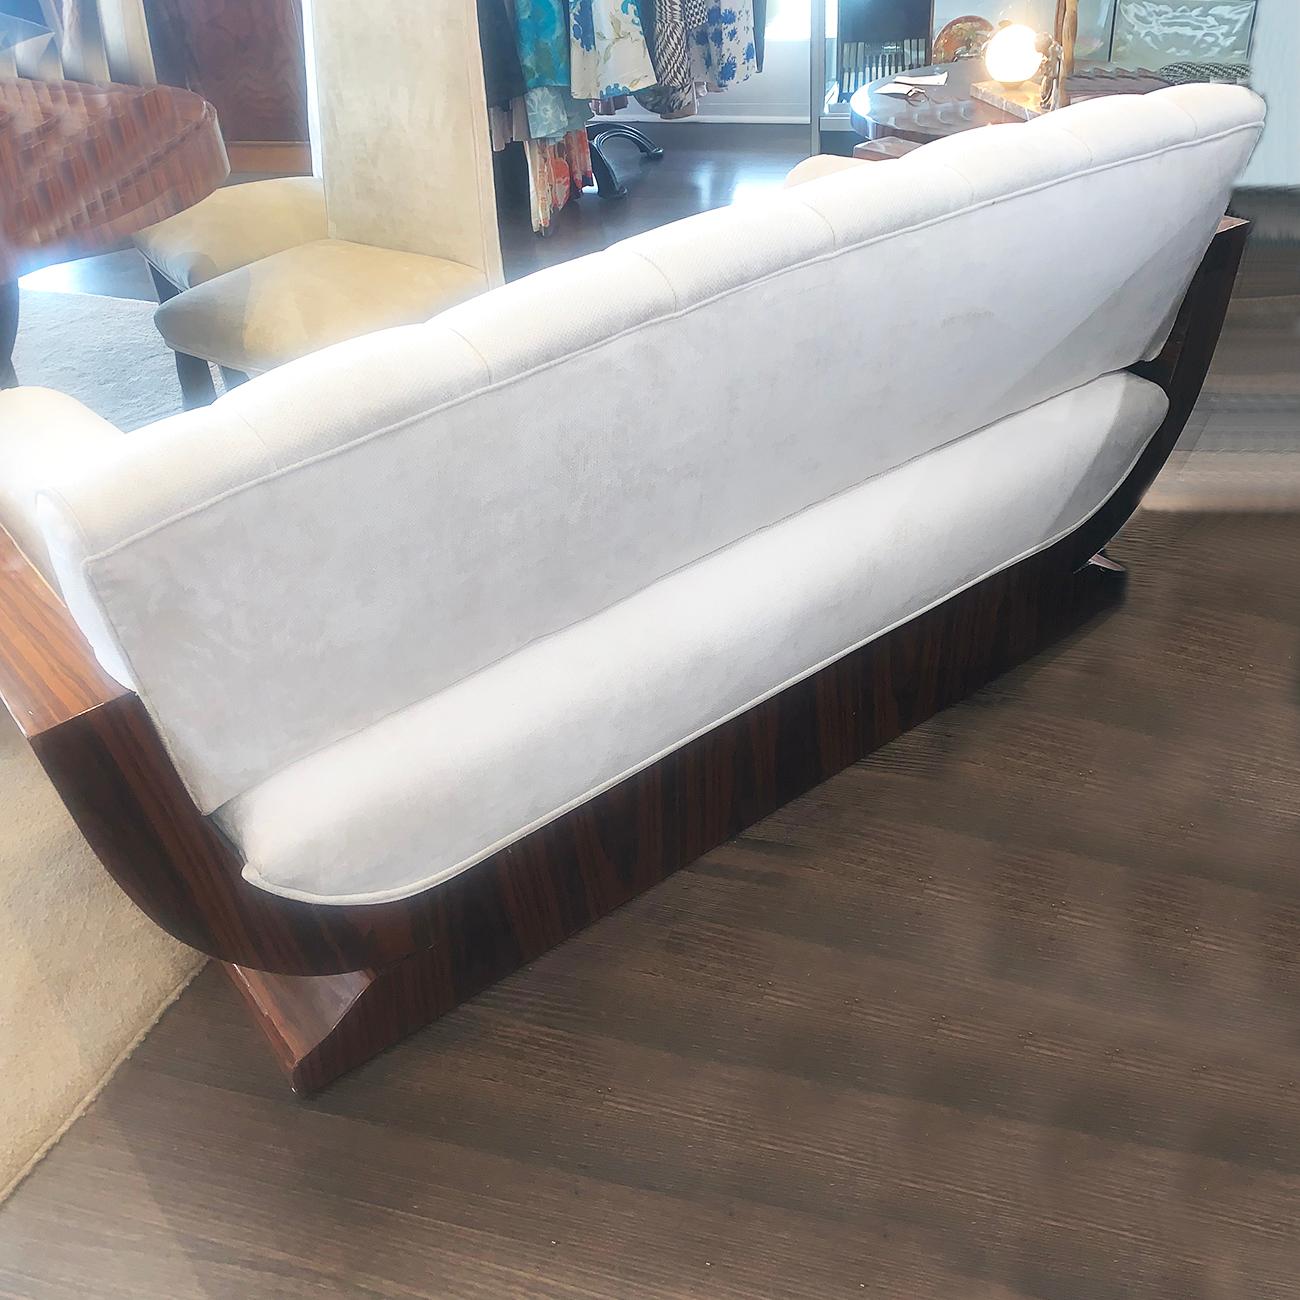 Art Deco Style D Shaped Sofa Reupholstered In Good Condition For Sale In Daylesford, Victoria